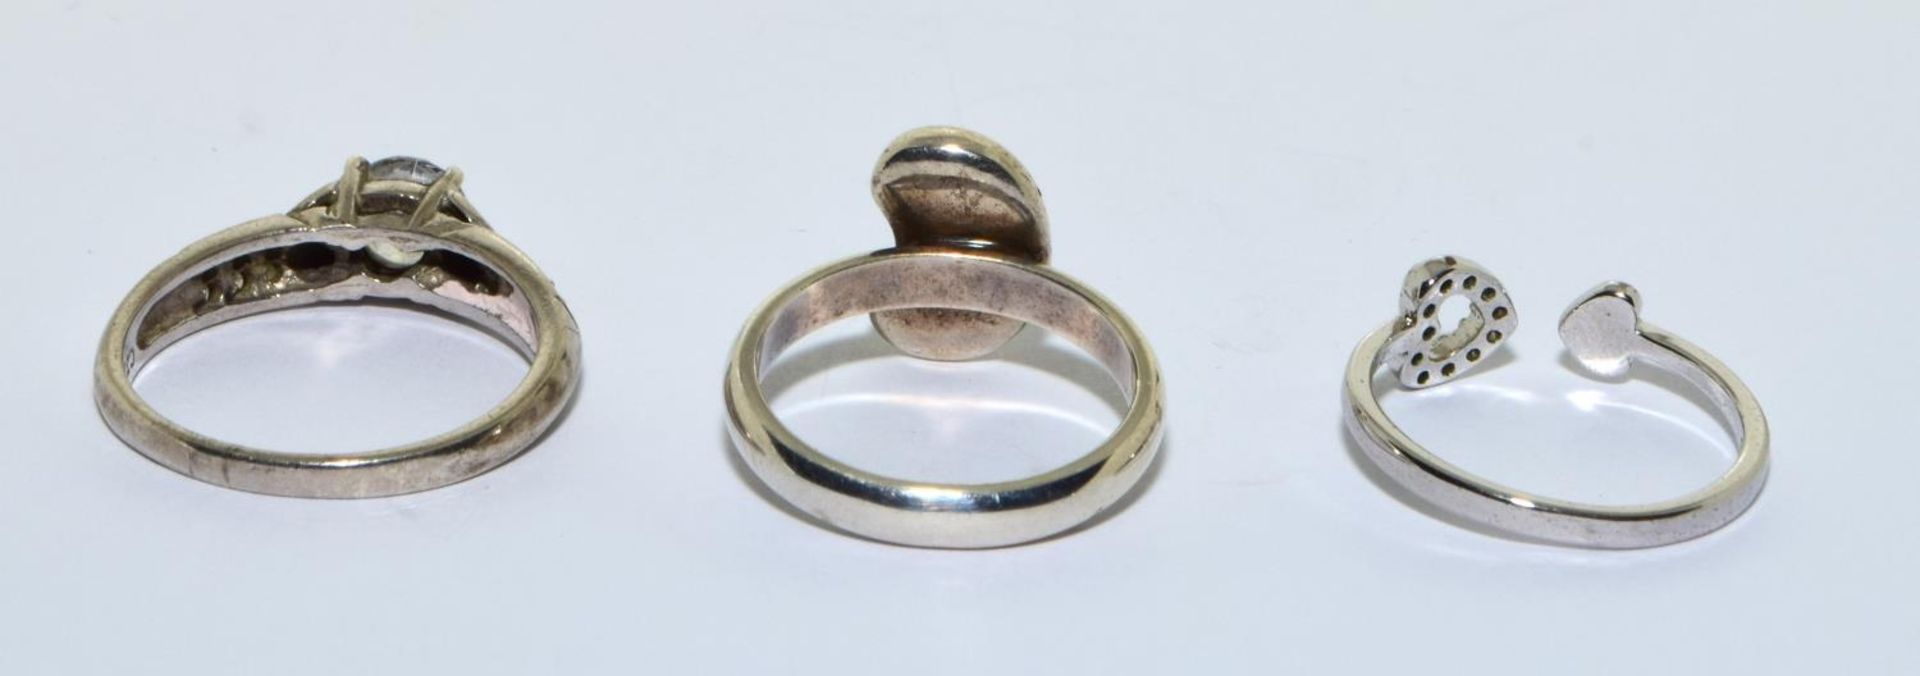 3 x 925 silver rings - Image 3 of 3